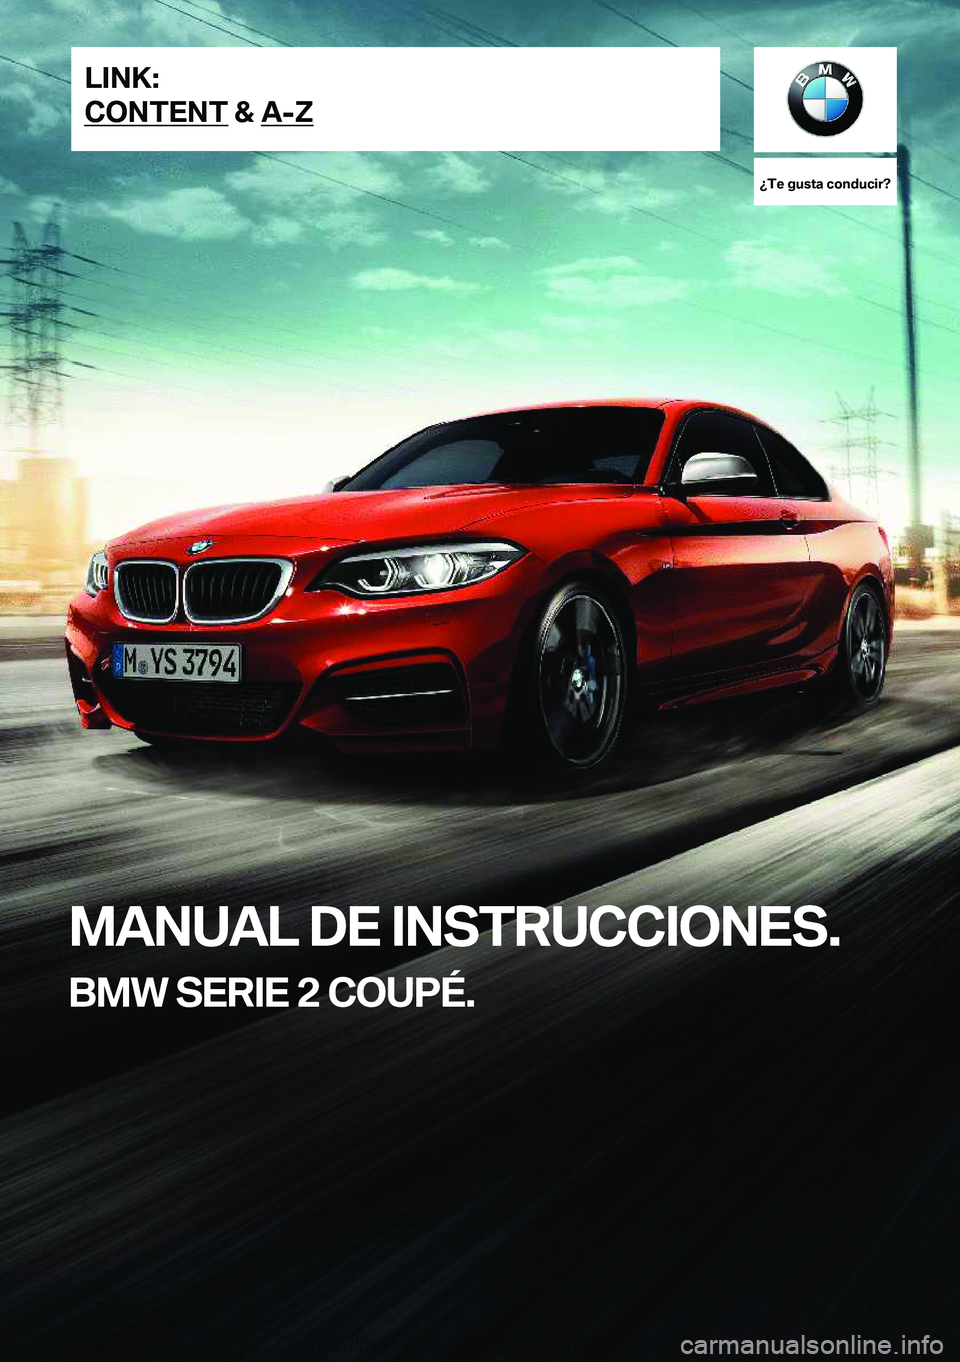 BMW 2 SERIES COUPE 2020  Manuales de Empleo (in Spanish) ��T�e��g�u�s�t�a��c�o�n�d�u�c�i�r� 
�M�A�N�U�A�L��D�E��I�N�S�T�R�U�C�C�I�O�N�E�S�.
�B�M�W��S�E�R�I�E��2��C�O�U�P�